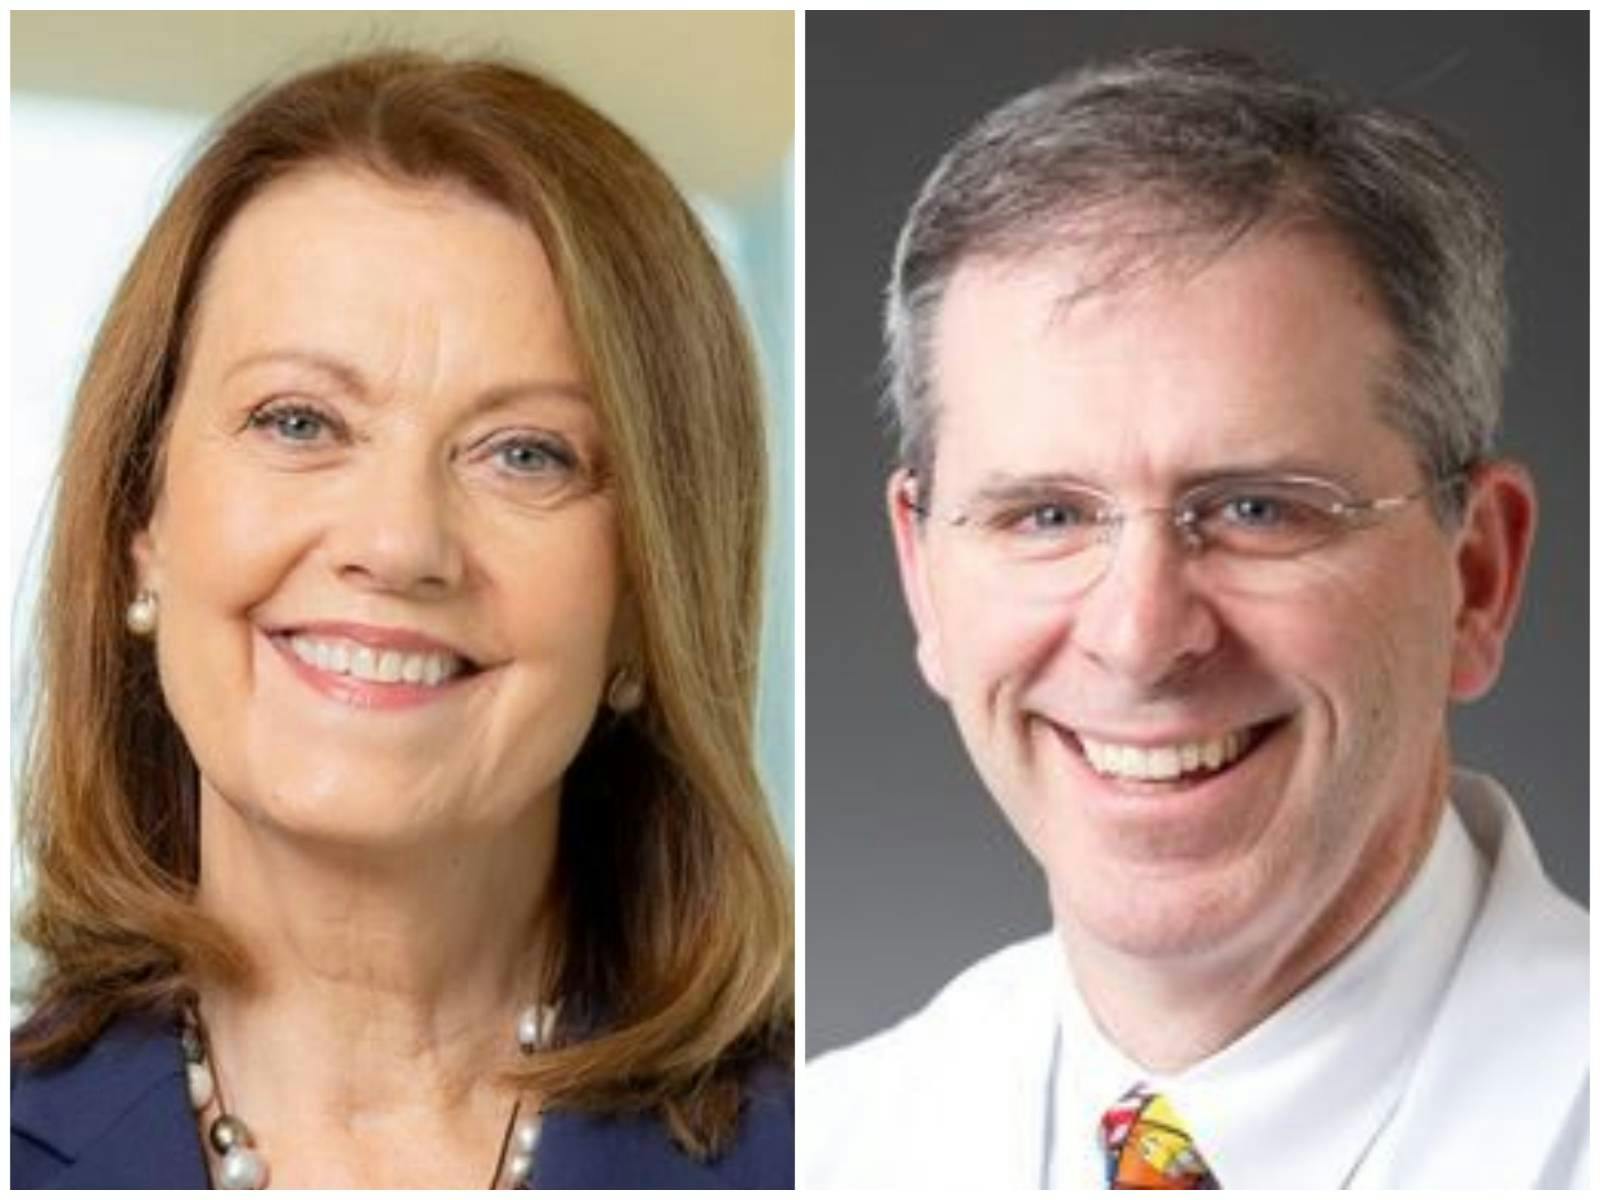 Joanne M. Conroy, president and CEO of Dartmouth Health in New Hampshire and Keith J. Loud, Dartmouth Health Children’s physician-in-chief and chair of pediatrics, called for action to reduce gun violence after the mass shooting in Lewiston, Maine. (Images: Dartmouth Health)